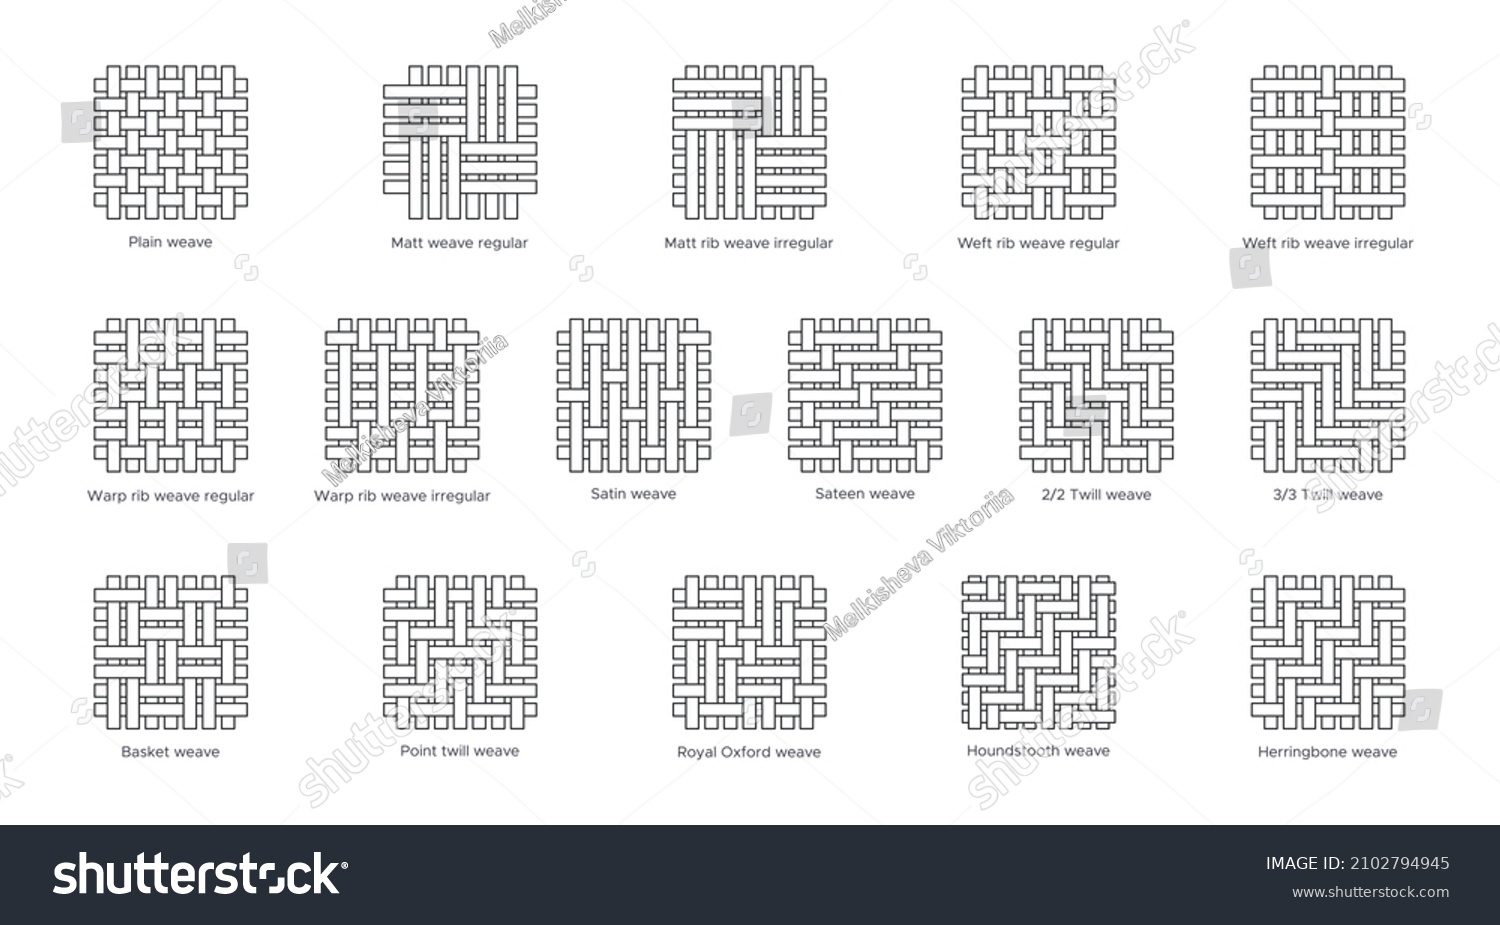 Fabric sample flat line icons set. Weave types - plain, rib, basket, satin. Woven swatches of twill, oxford, houndstooth and herringbone. Vector illustration in flat icon style with editable stroke. #2102794945